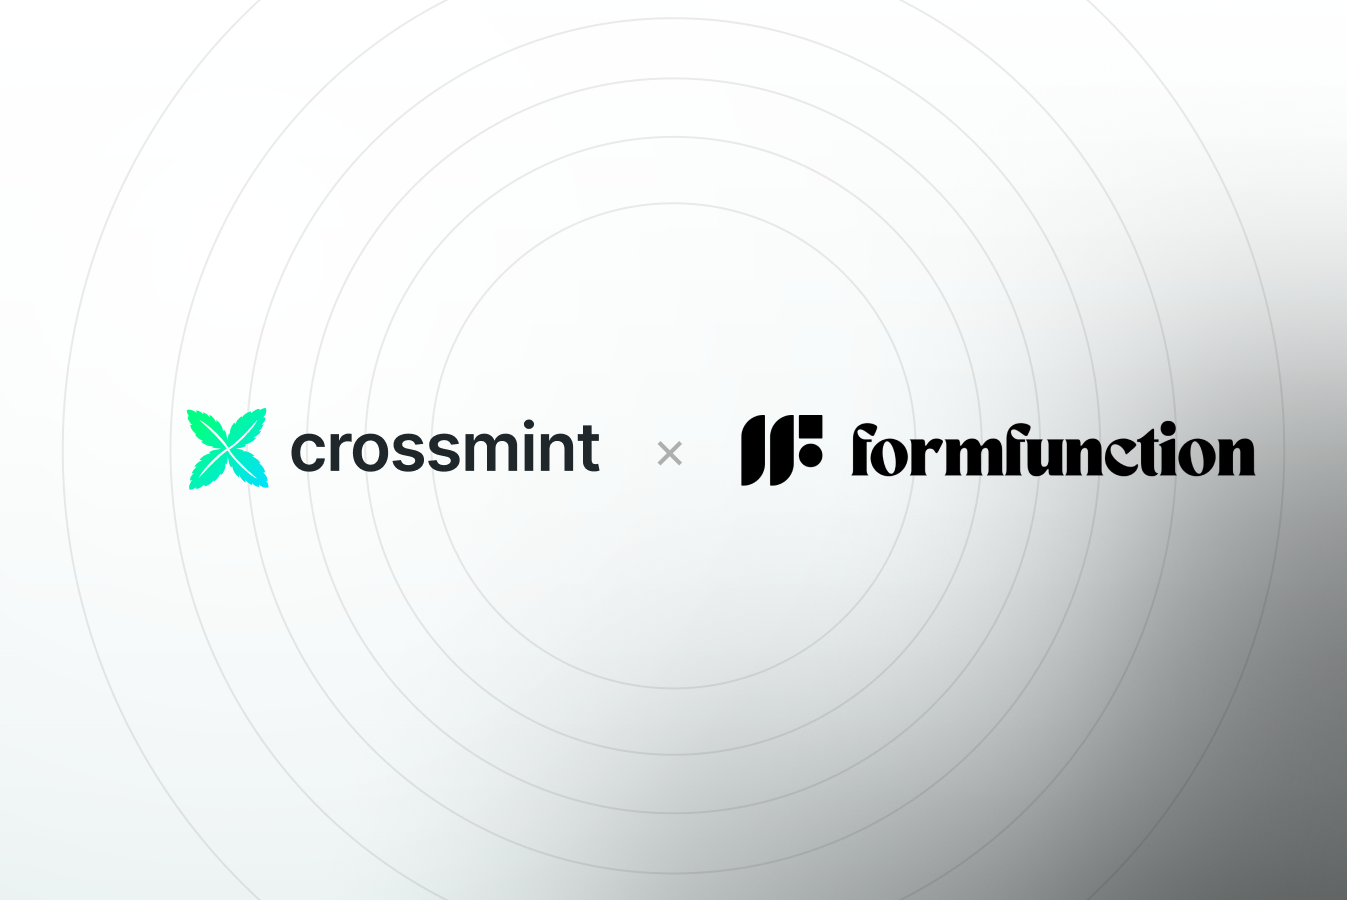 Credit Card Payments are Live for Instant Sales on Formfunction!